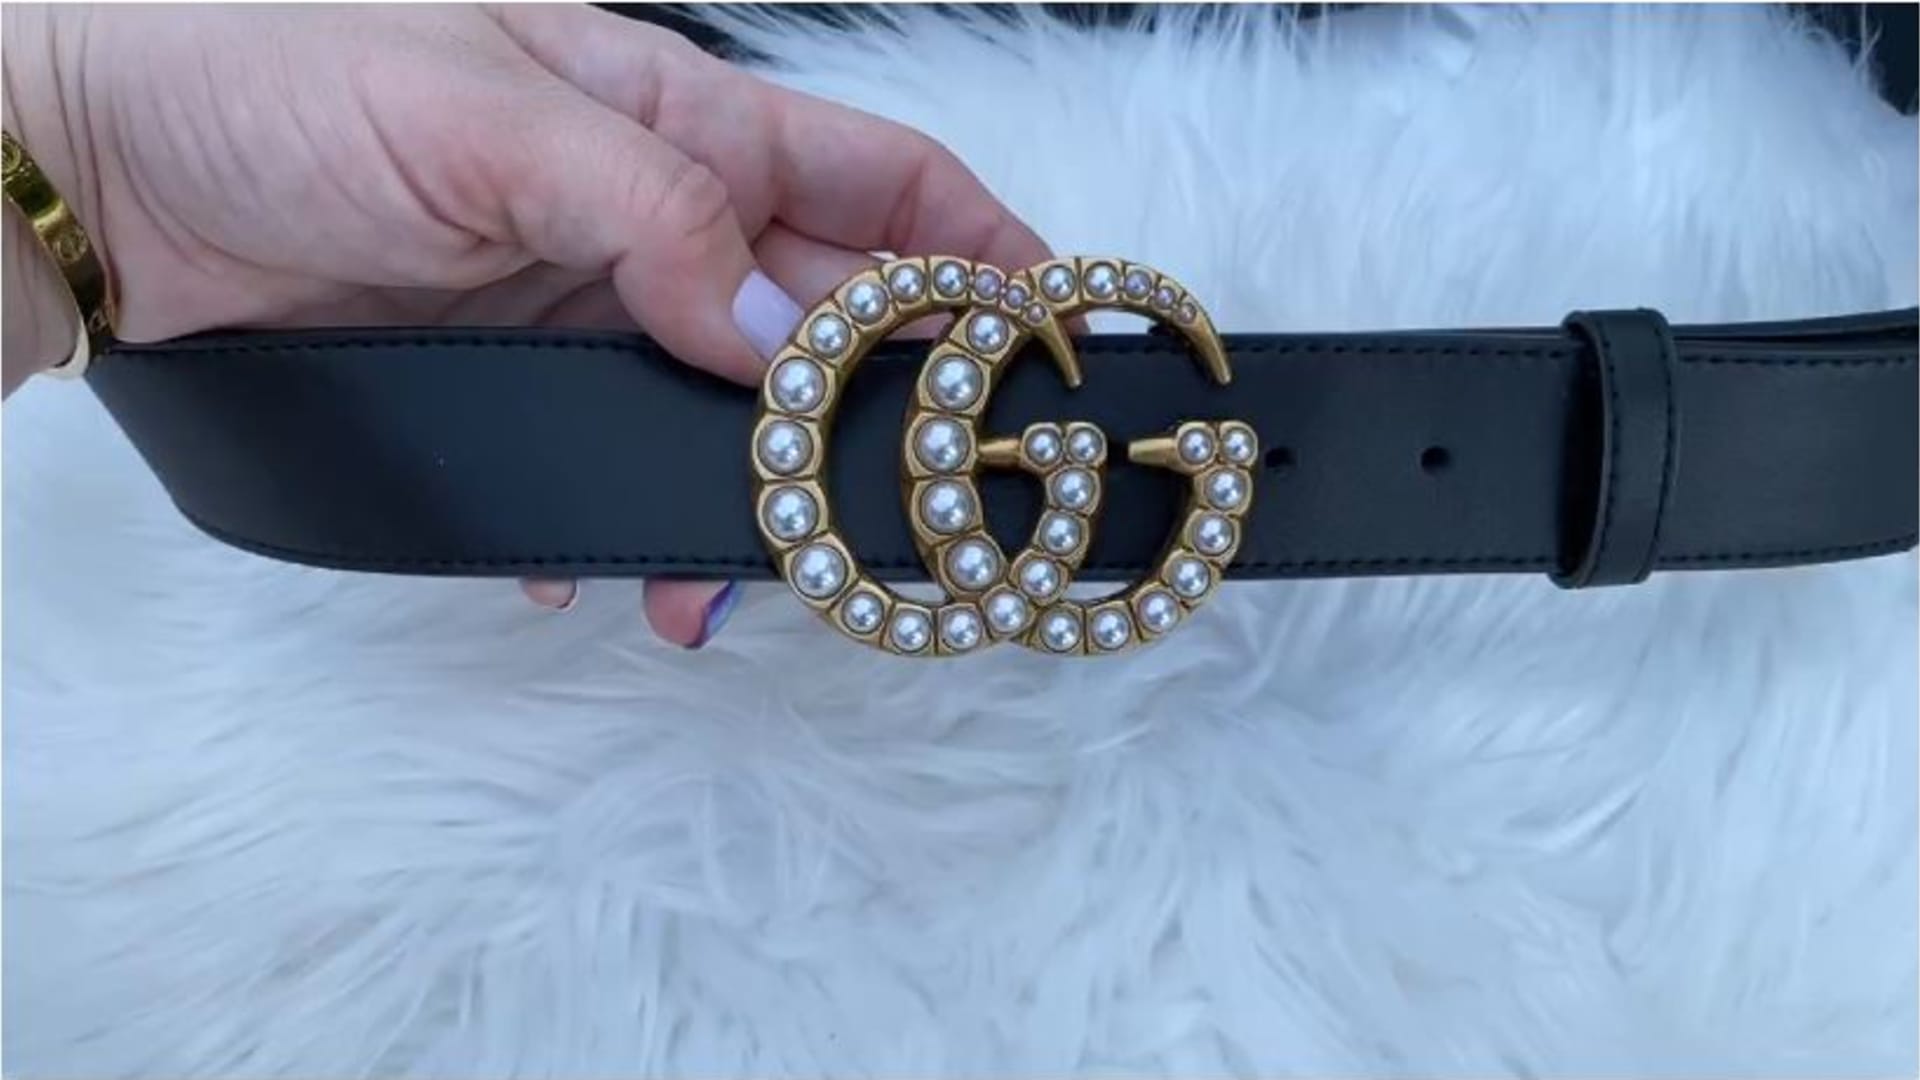 Amazon on Thursday filed a lawsuit against two influencers and nearly a dozen merchants for allegedly marketing and selling counterfeit goods like the knockoff Gucci belt pictured above.